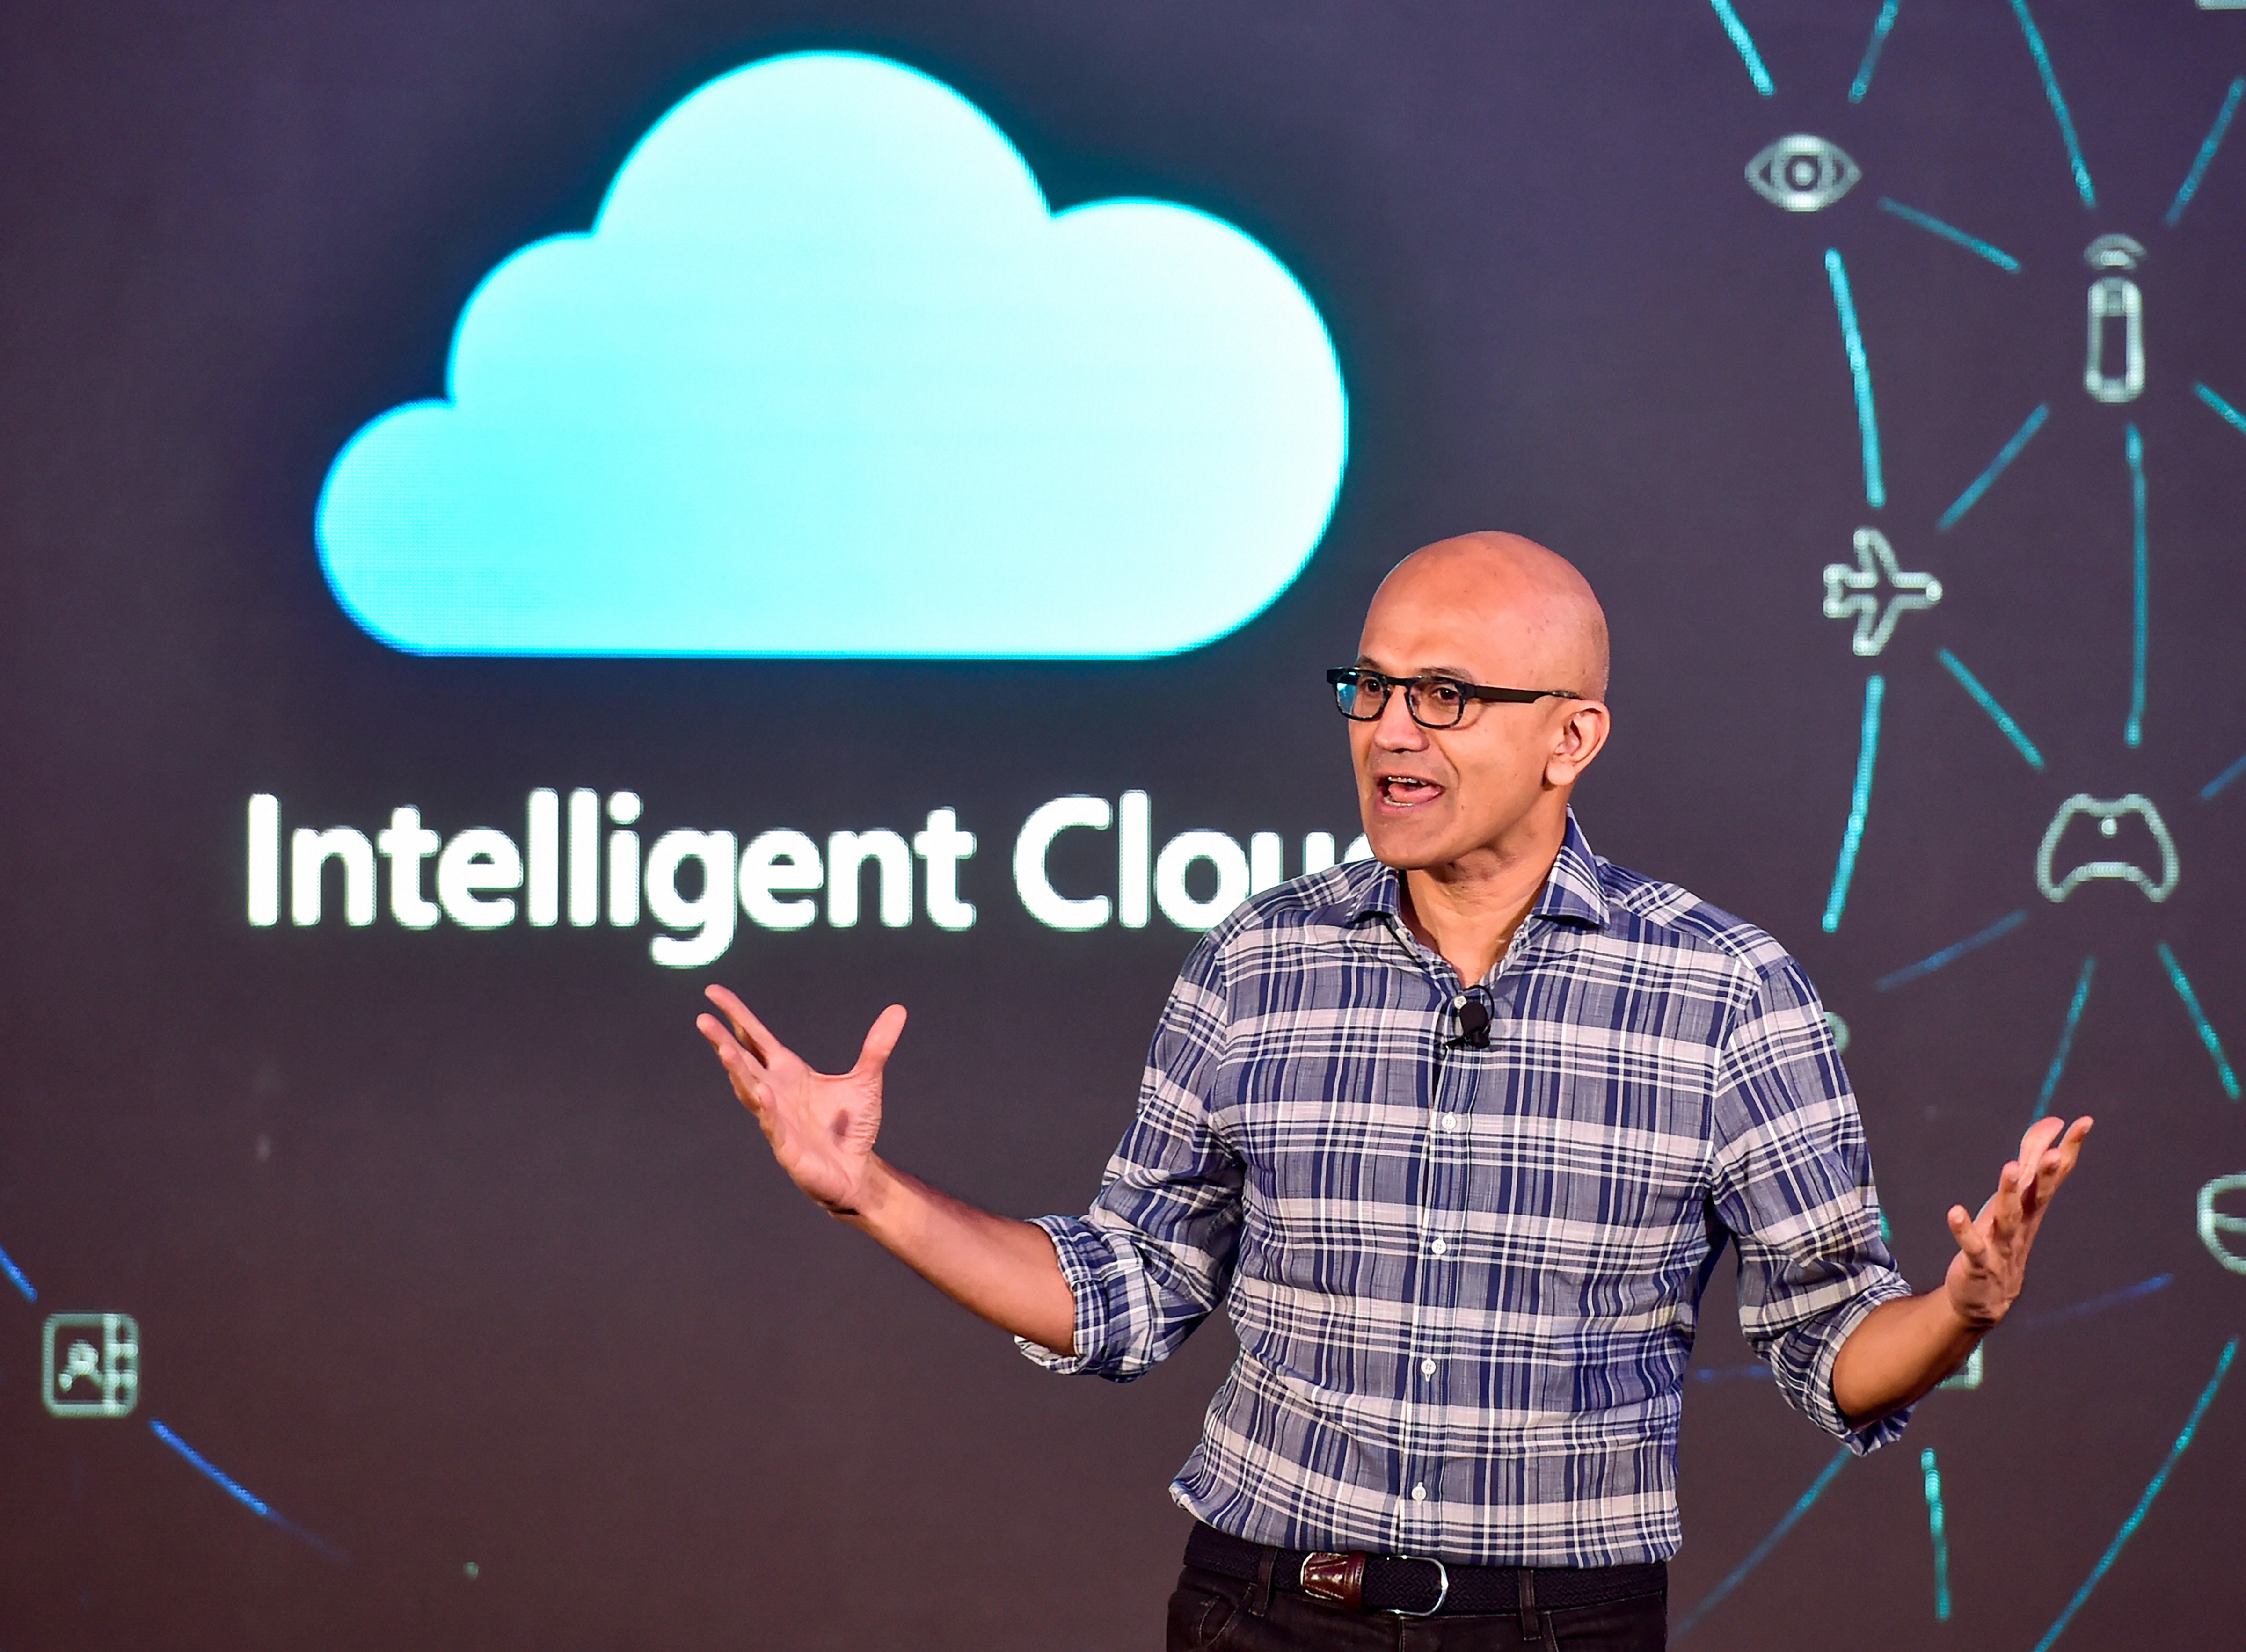 Developers need to be responsible, should focus on trust, inclusivity: Nadella